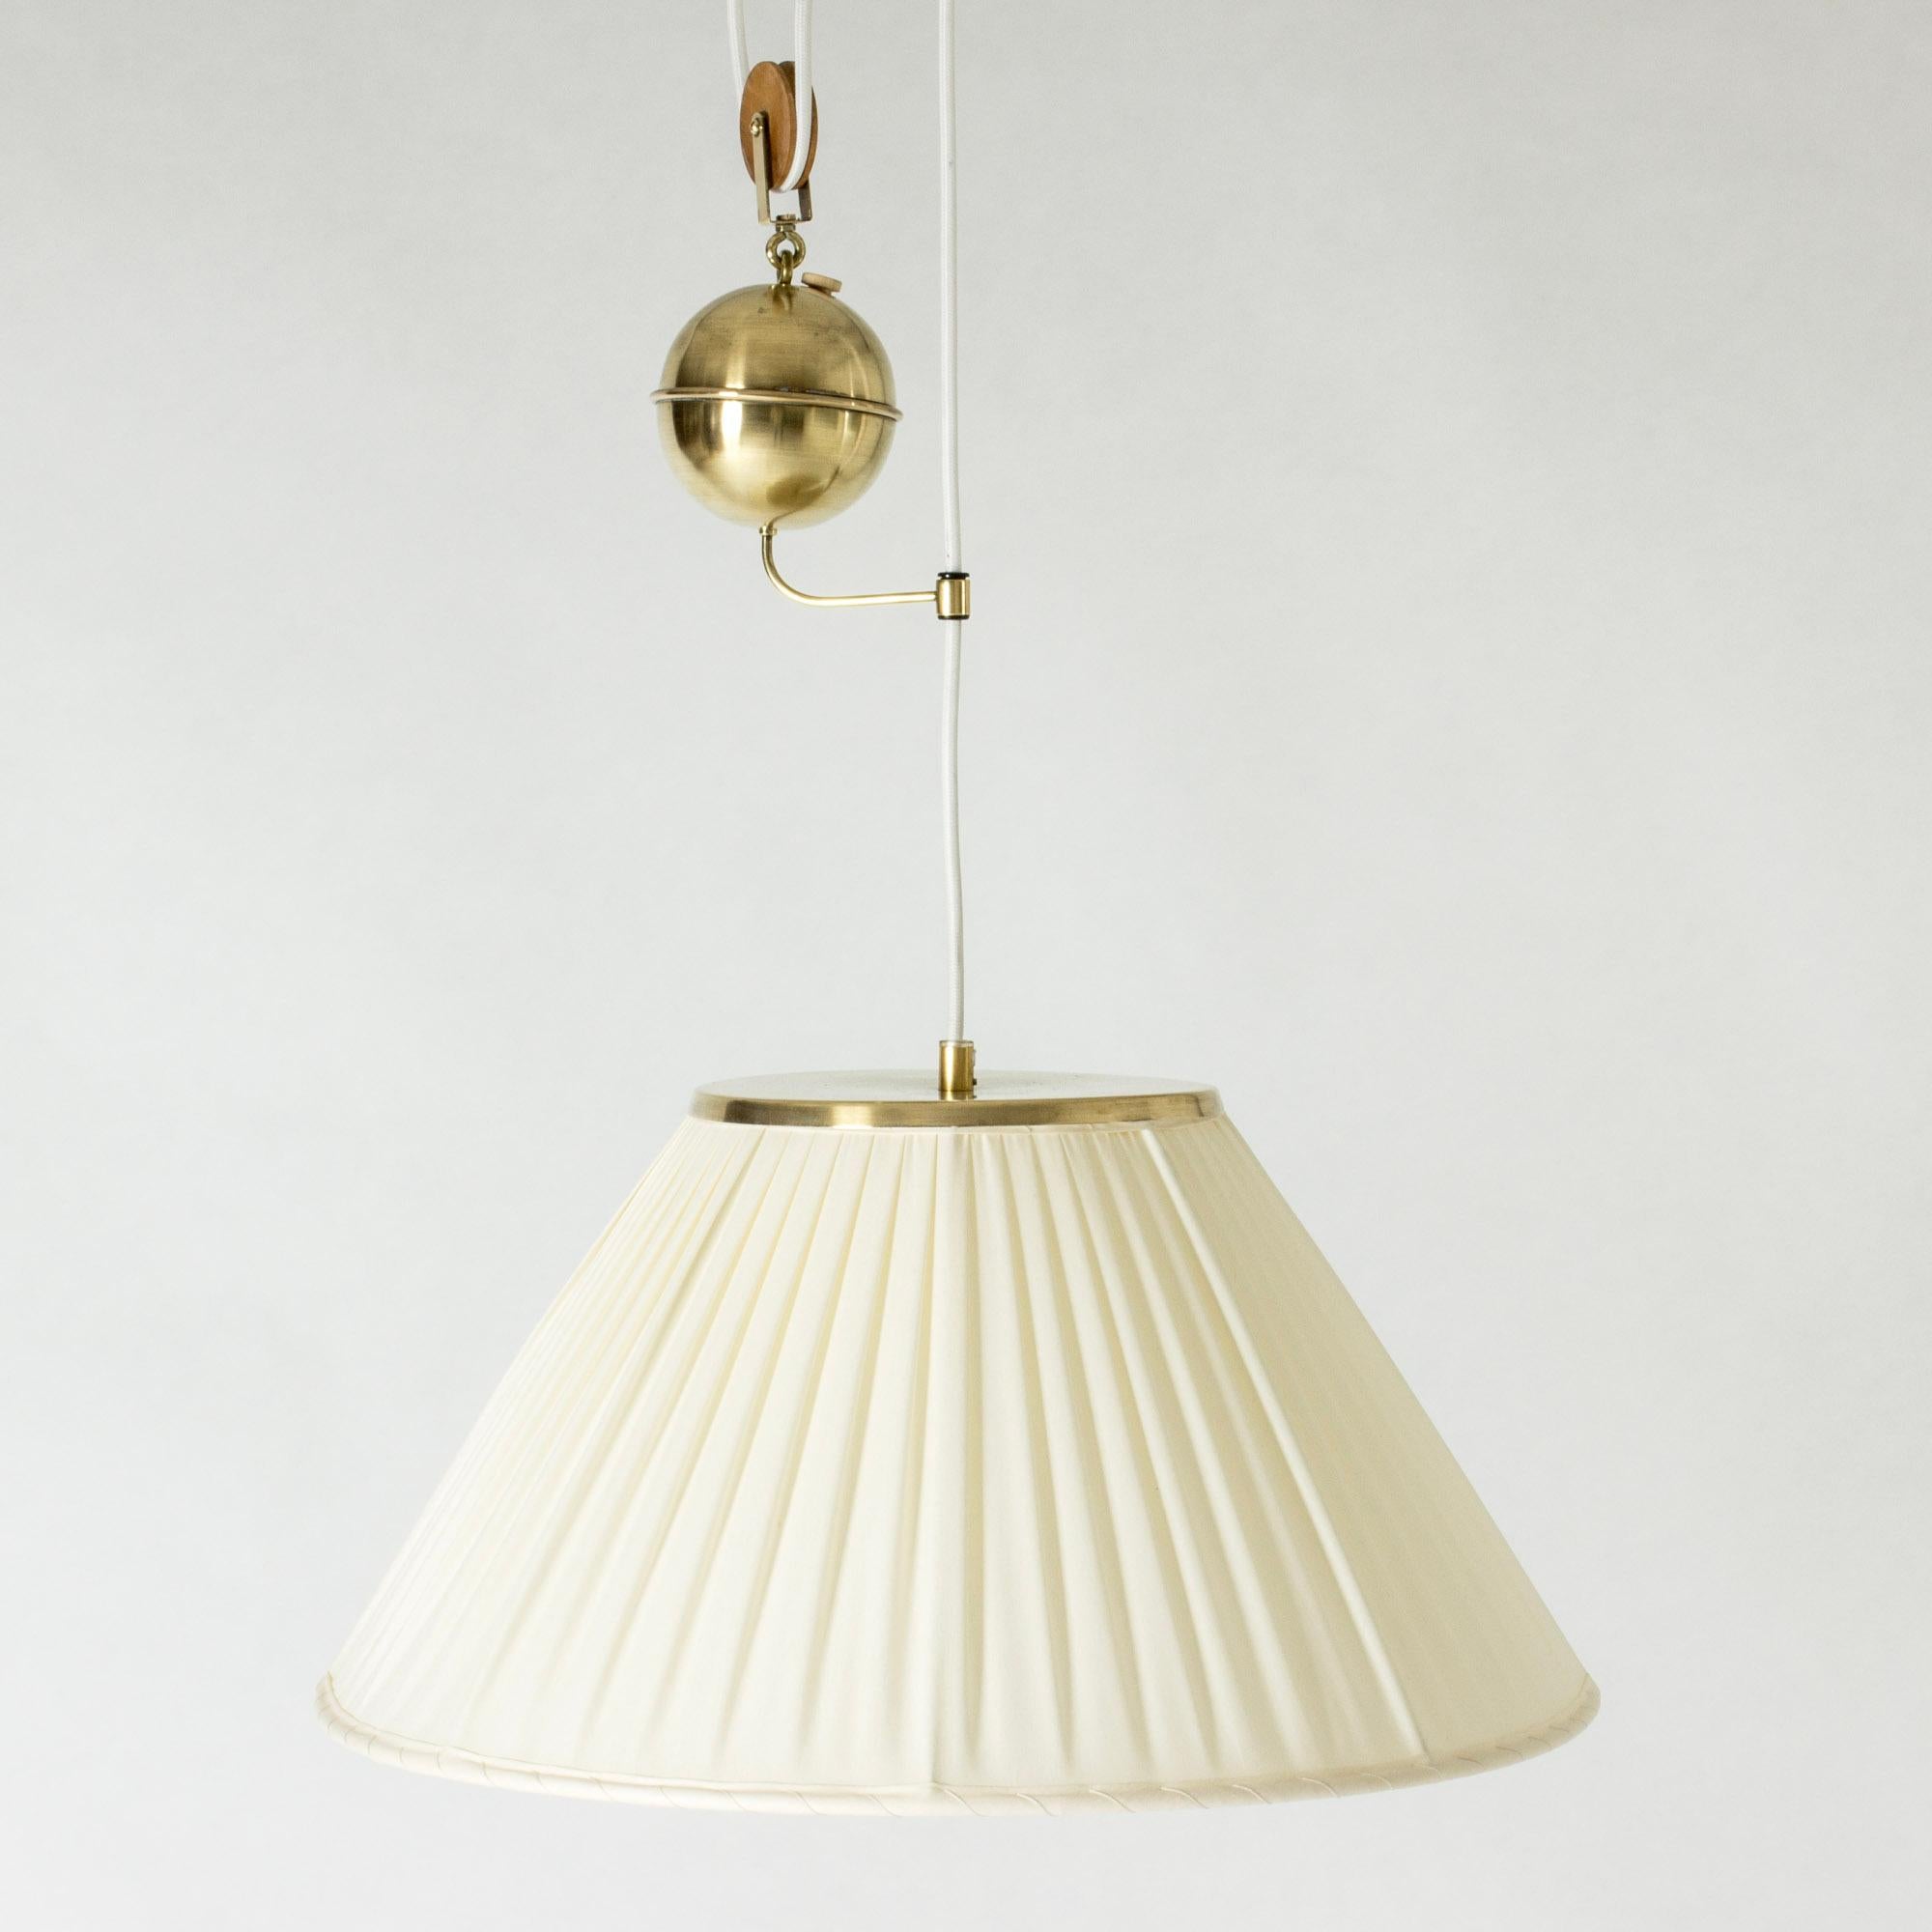 Beautiful brass pendant light by Josef Frank, in an elegant, voluminous design. Shade made from pleated fabric. A decorative brass sphere can be slid up and down on the chord to adjust its length. The elegant mechanism is a great part of the